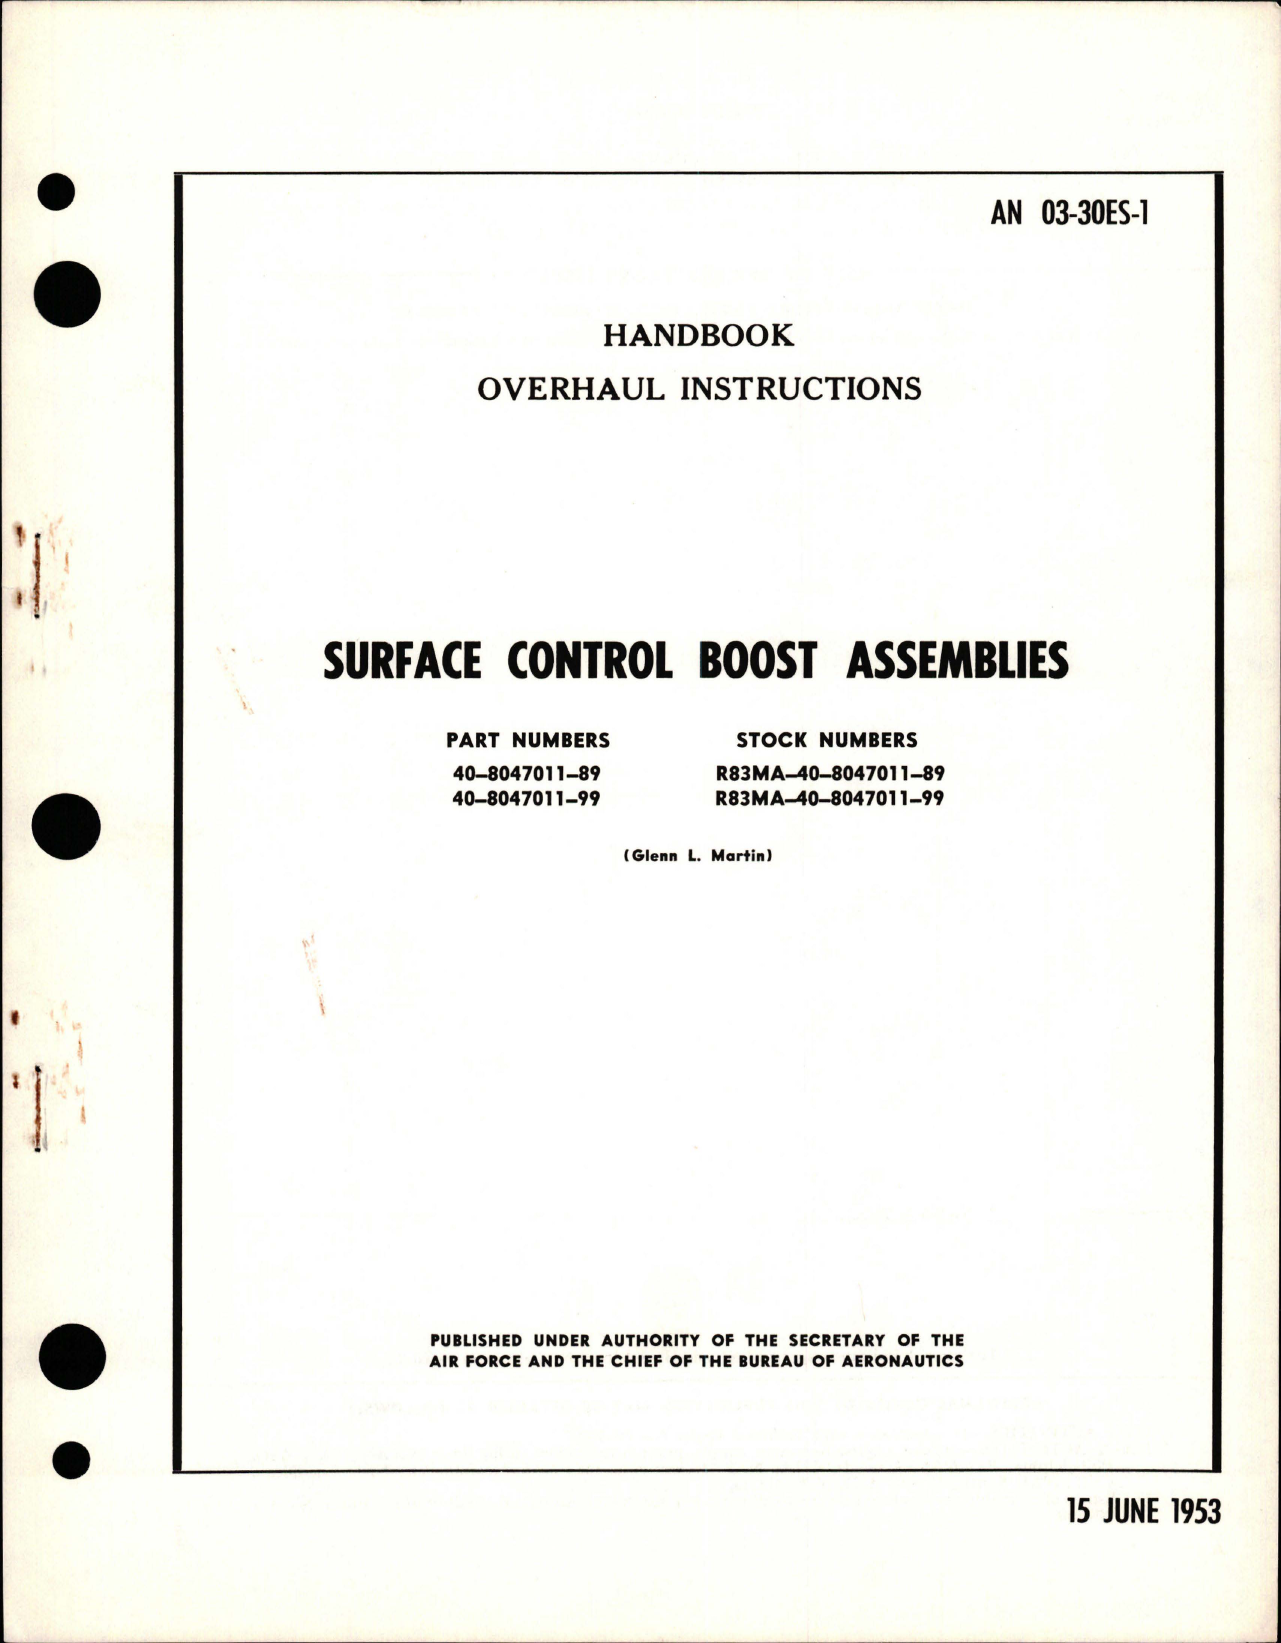 Sample page 1 from AirCorps Library document: Overhaul Instructions for Surface Control Boost Assembly - Parts 40-8047011-89 and 40-8047011-99